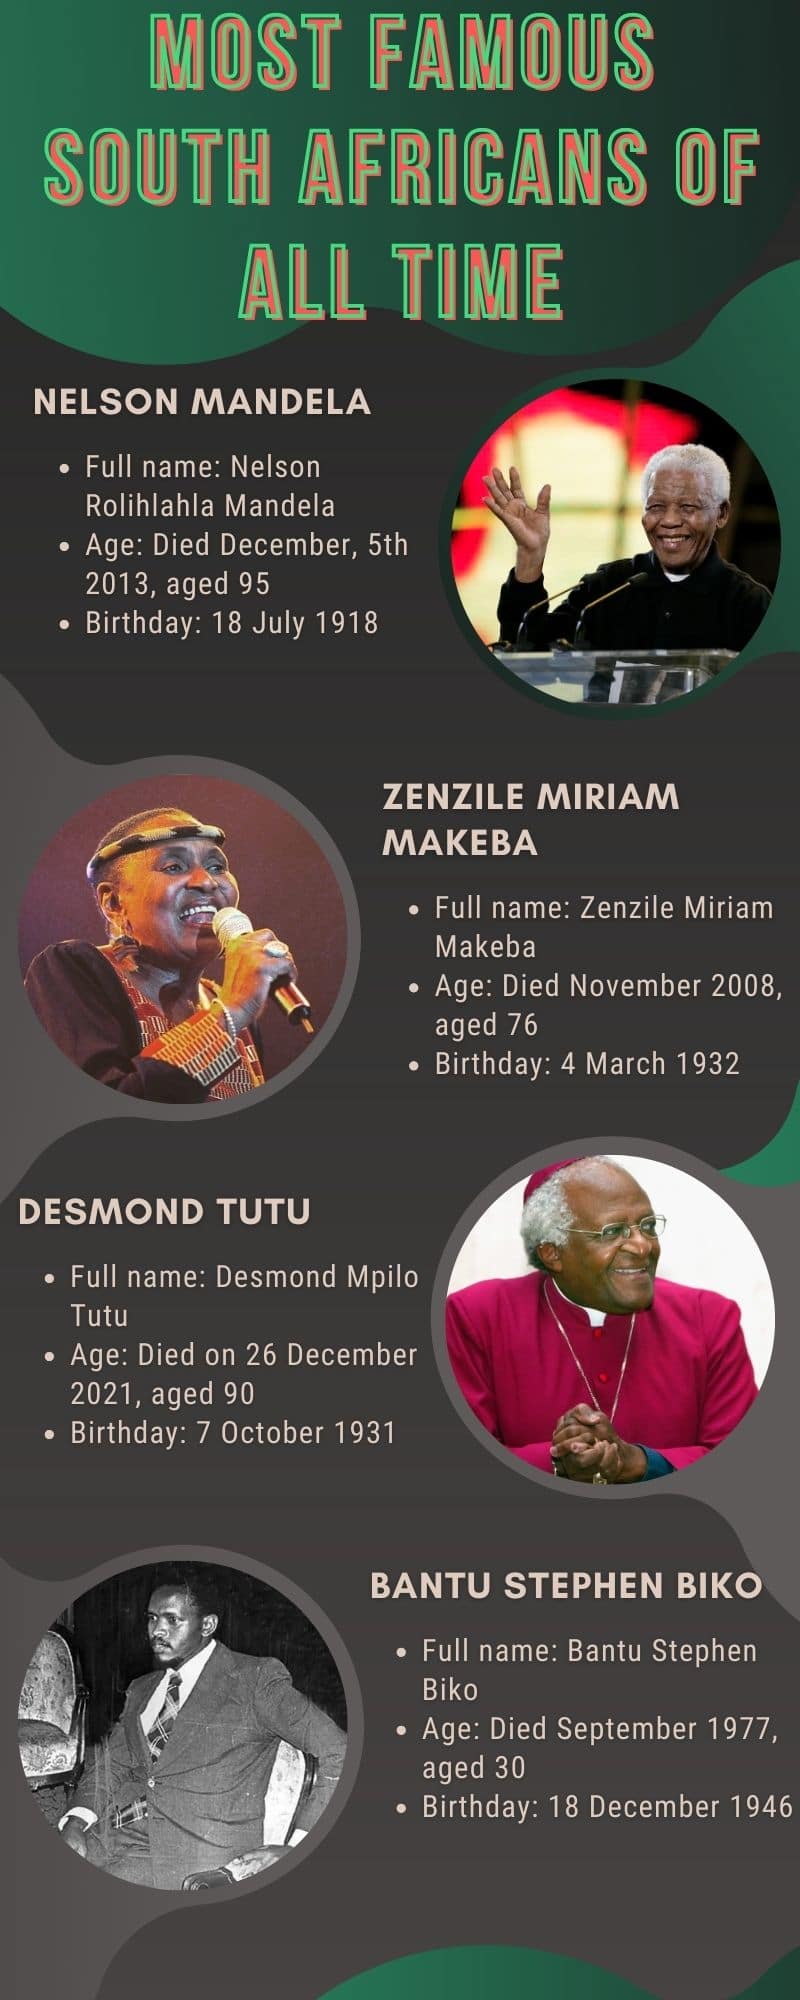 Most famous South Africans of all time